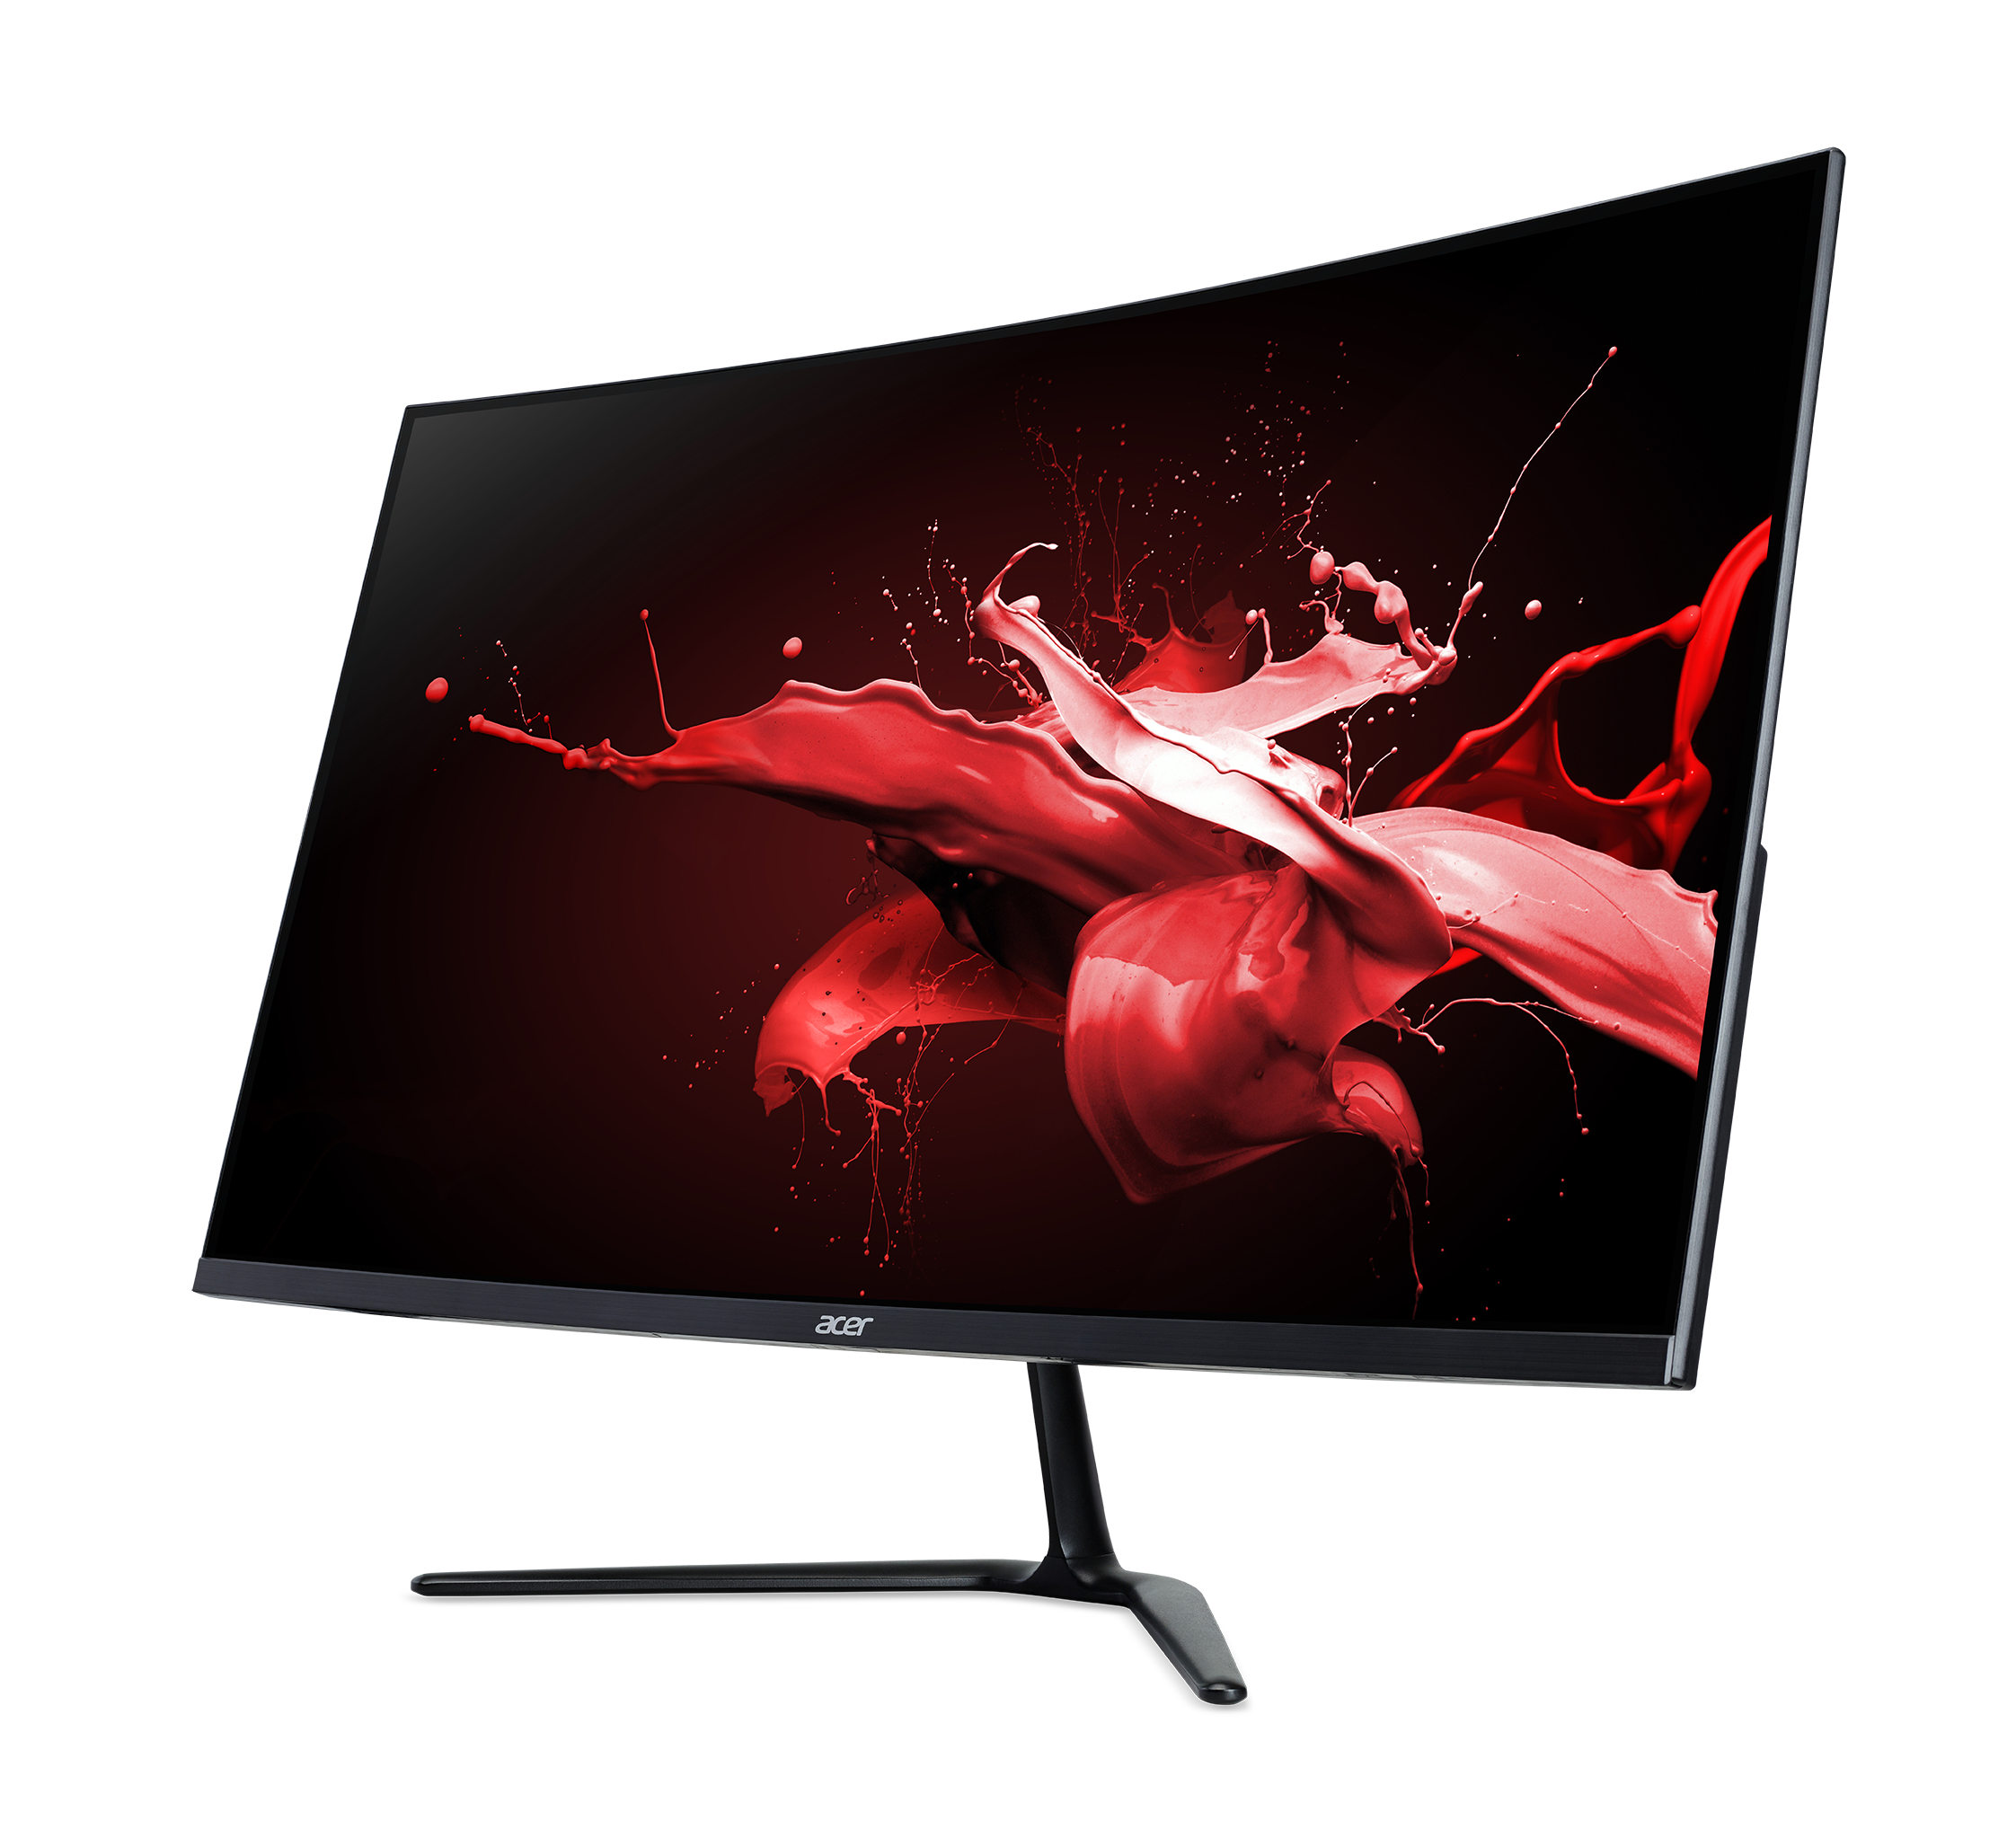 Acer Nitro 31.5" 1500R Curved Full HD (1920 x 1080) Gaming Monitor, Black, ED320QR S3biipx - image 5 of 8